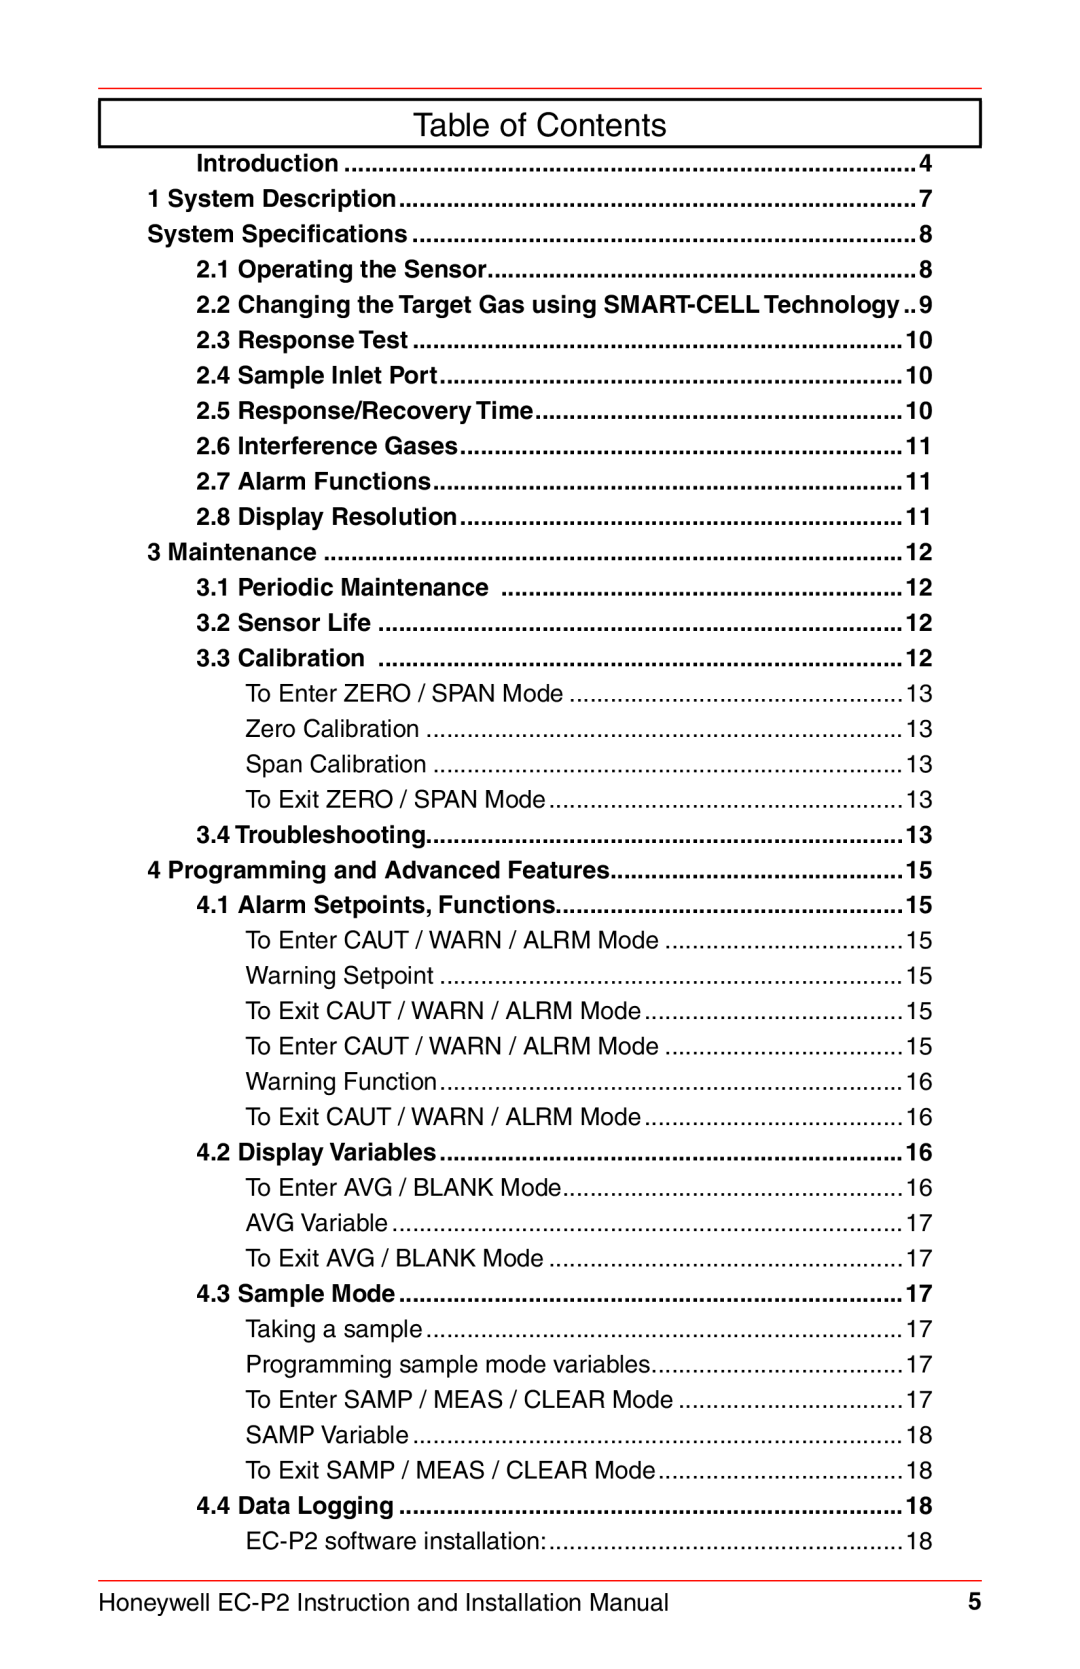 Honeywell EC-P2 instruction manual Table of Contents 